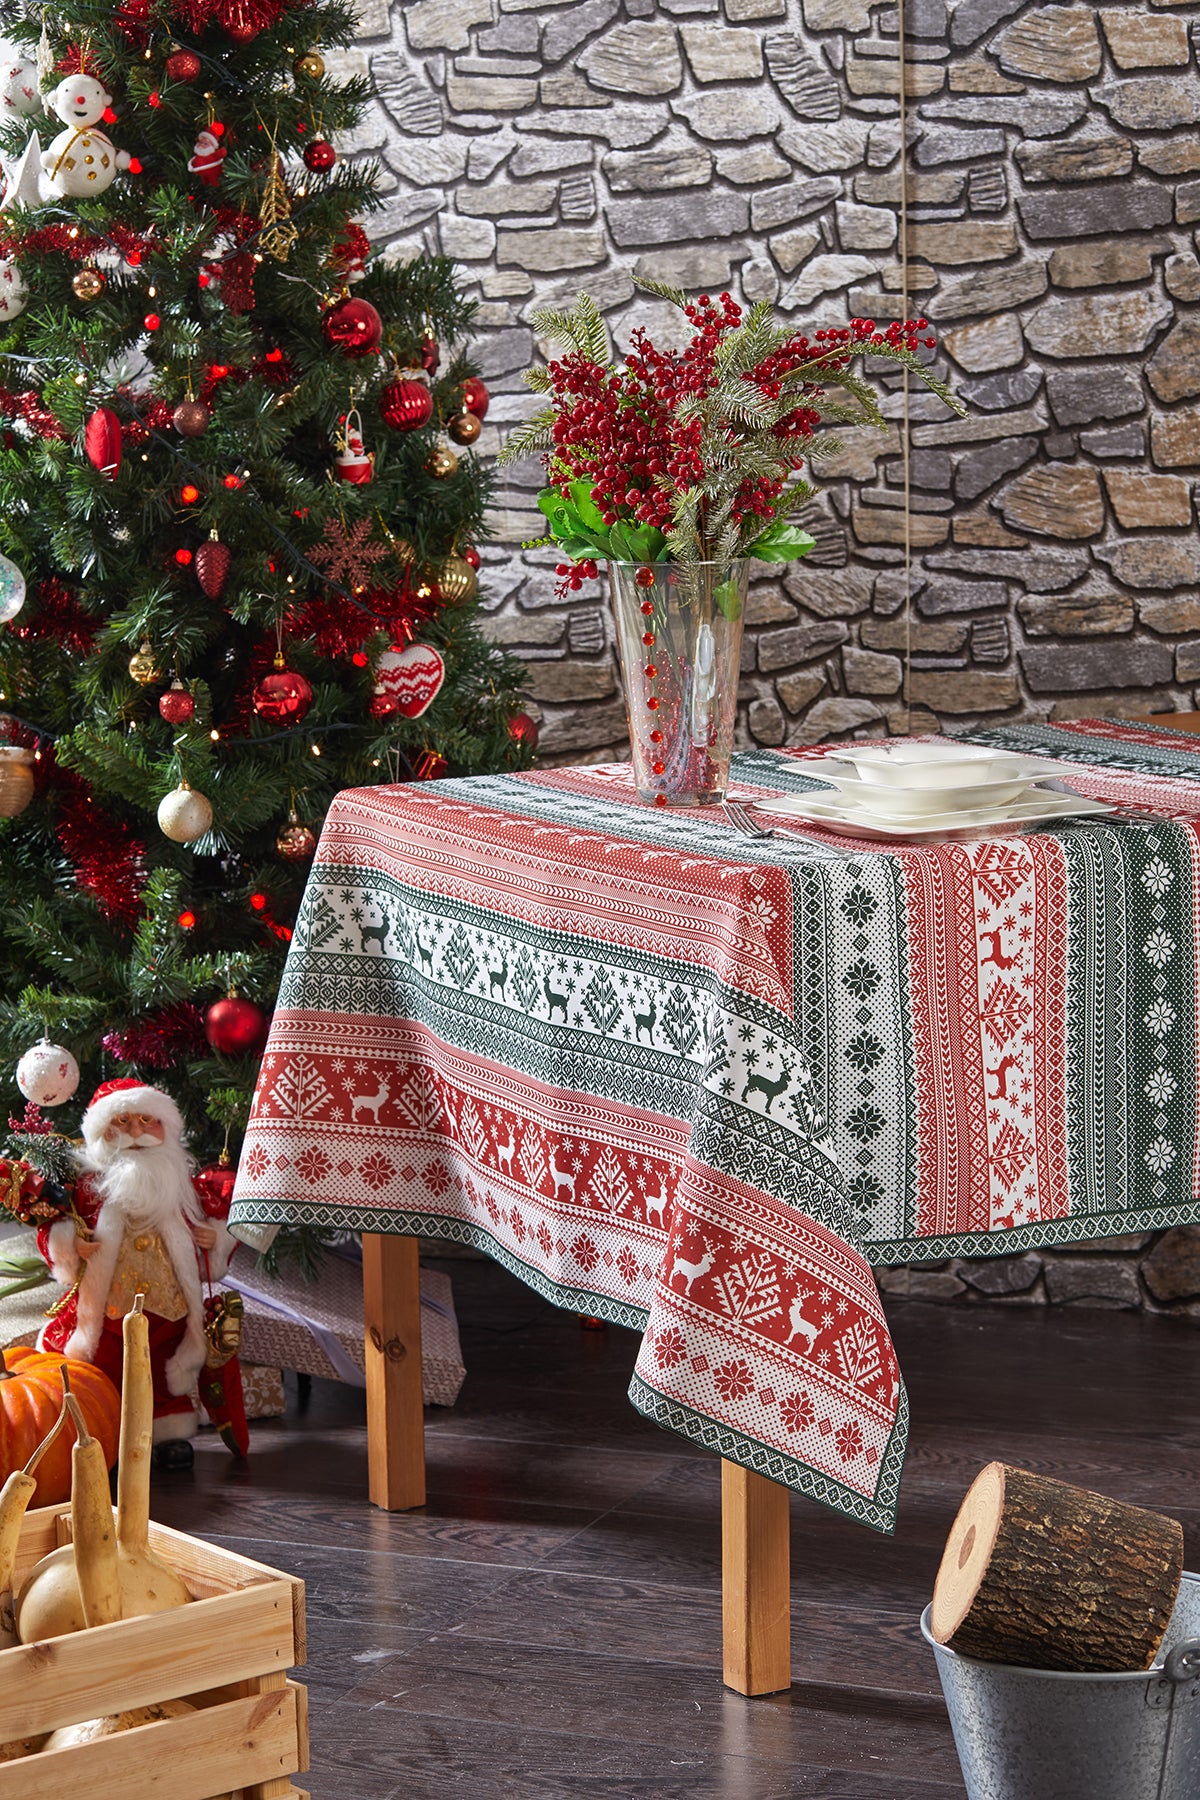 Christmas Themed Tablecloth, Deer Pattern Christmas Tablecloth, Holiday Decorating - Wear Sierra